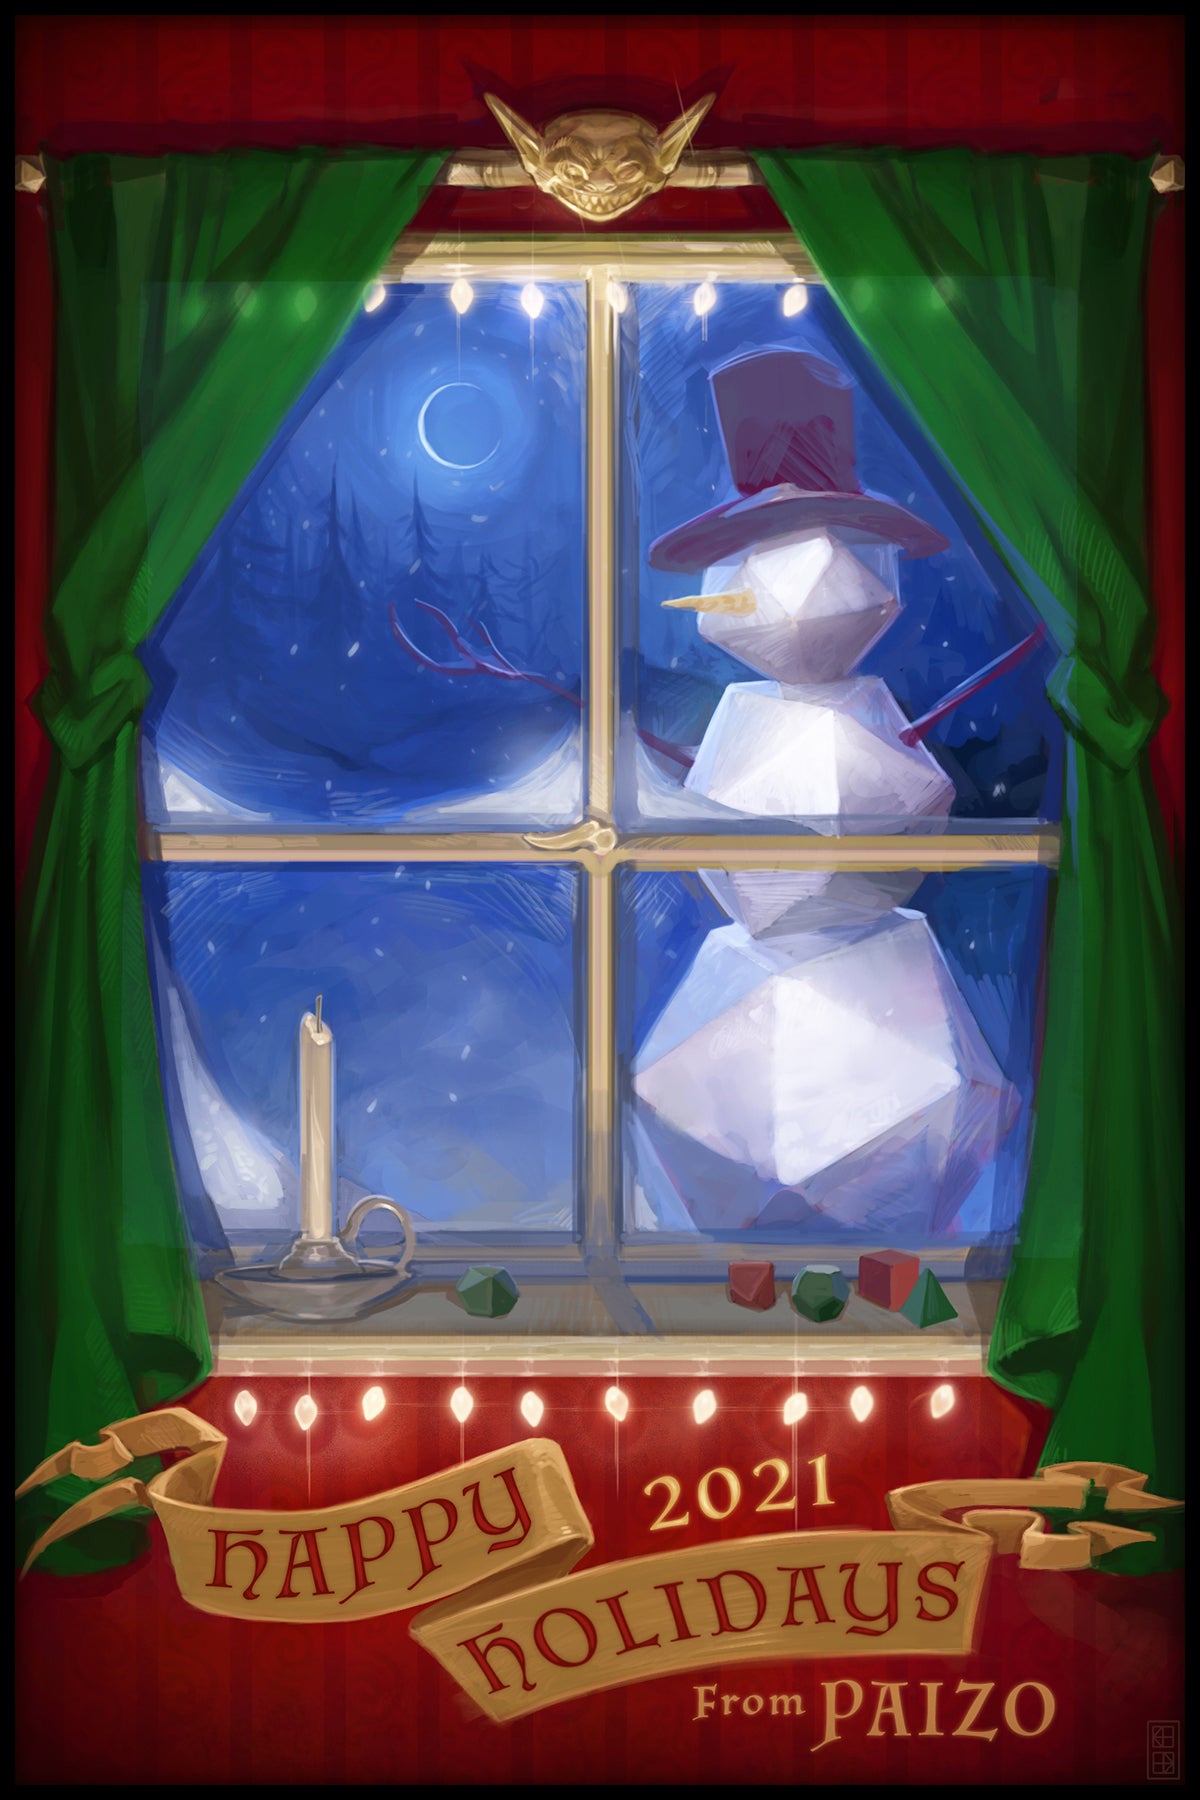 Happy Holidays from Paizo 2021 Holiday card, looking out a green curtained window onto a snowy night and a large snowman whose body is shaped like three D20s stacked on top of each other